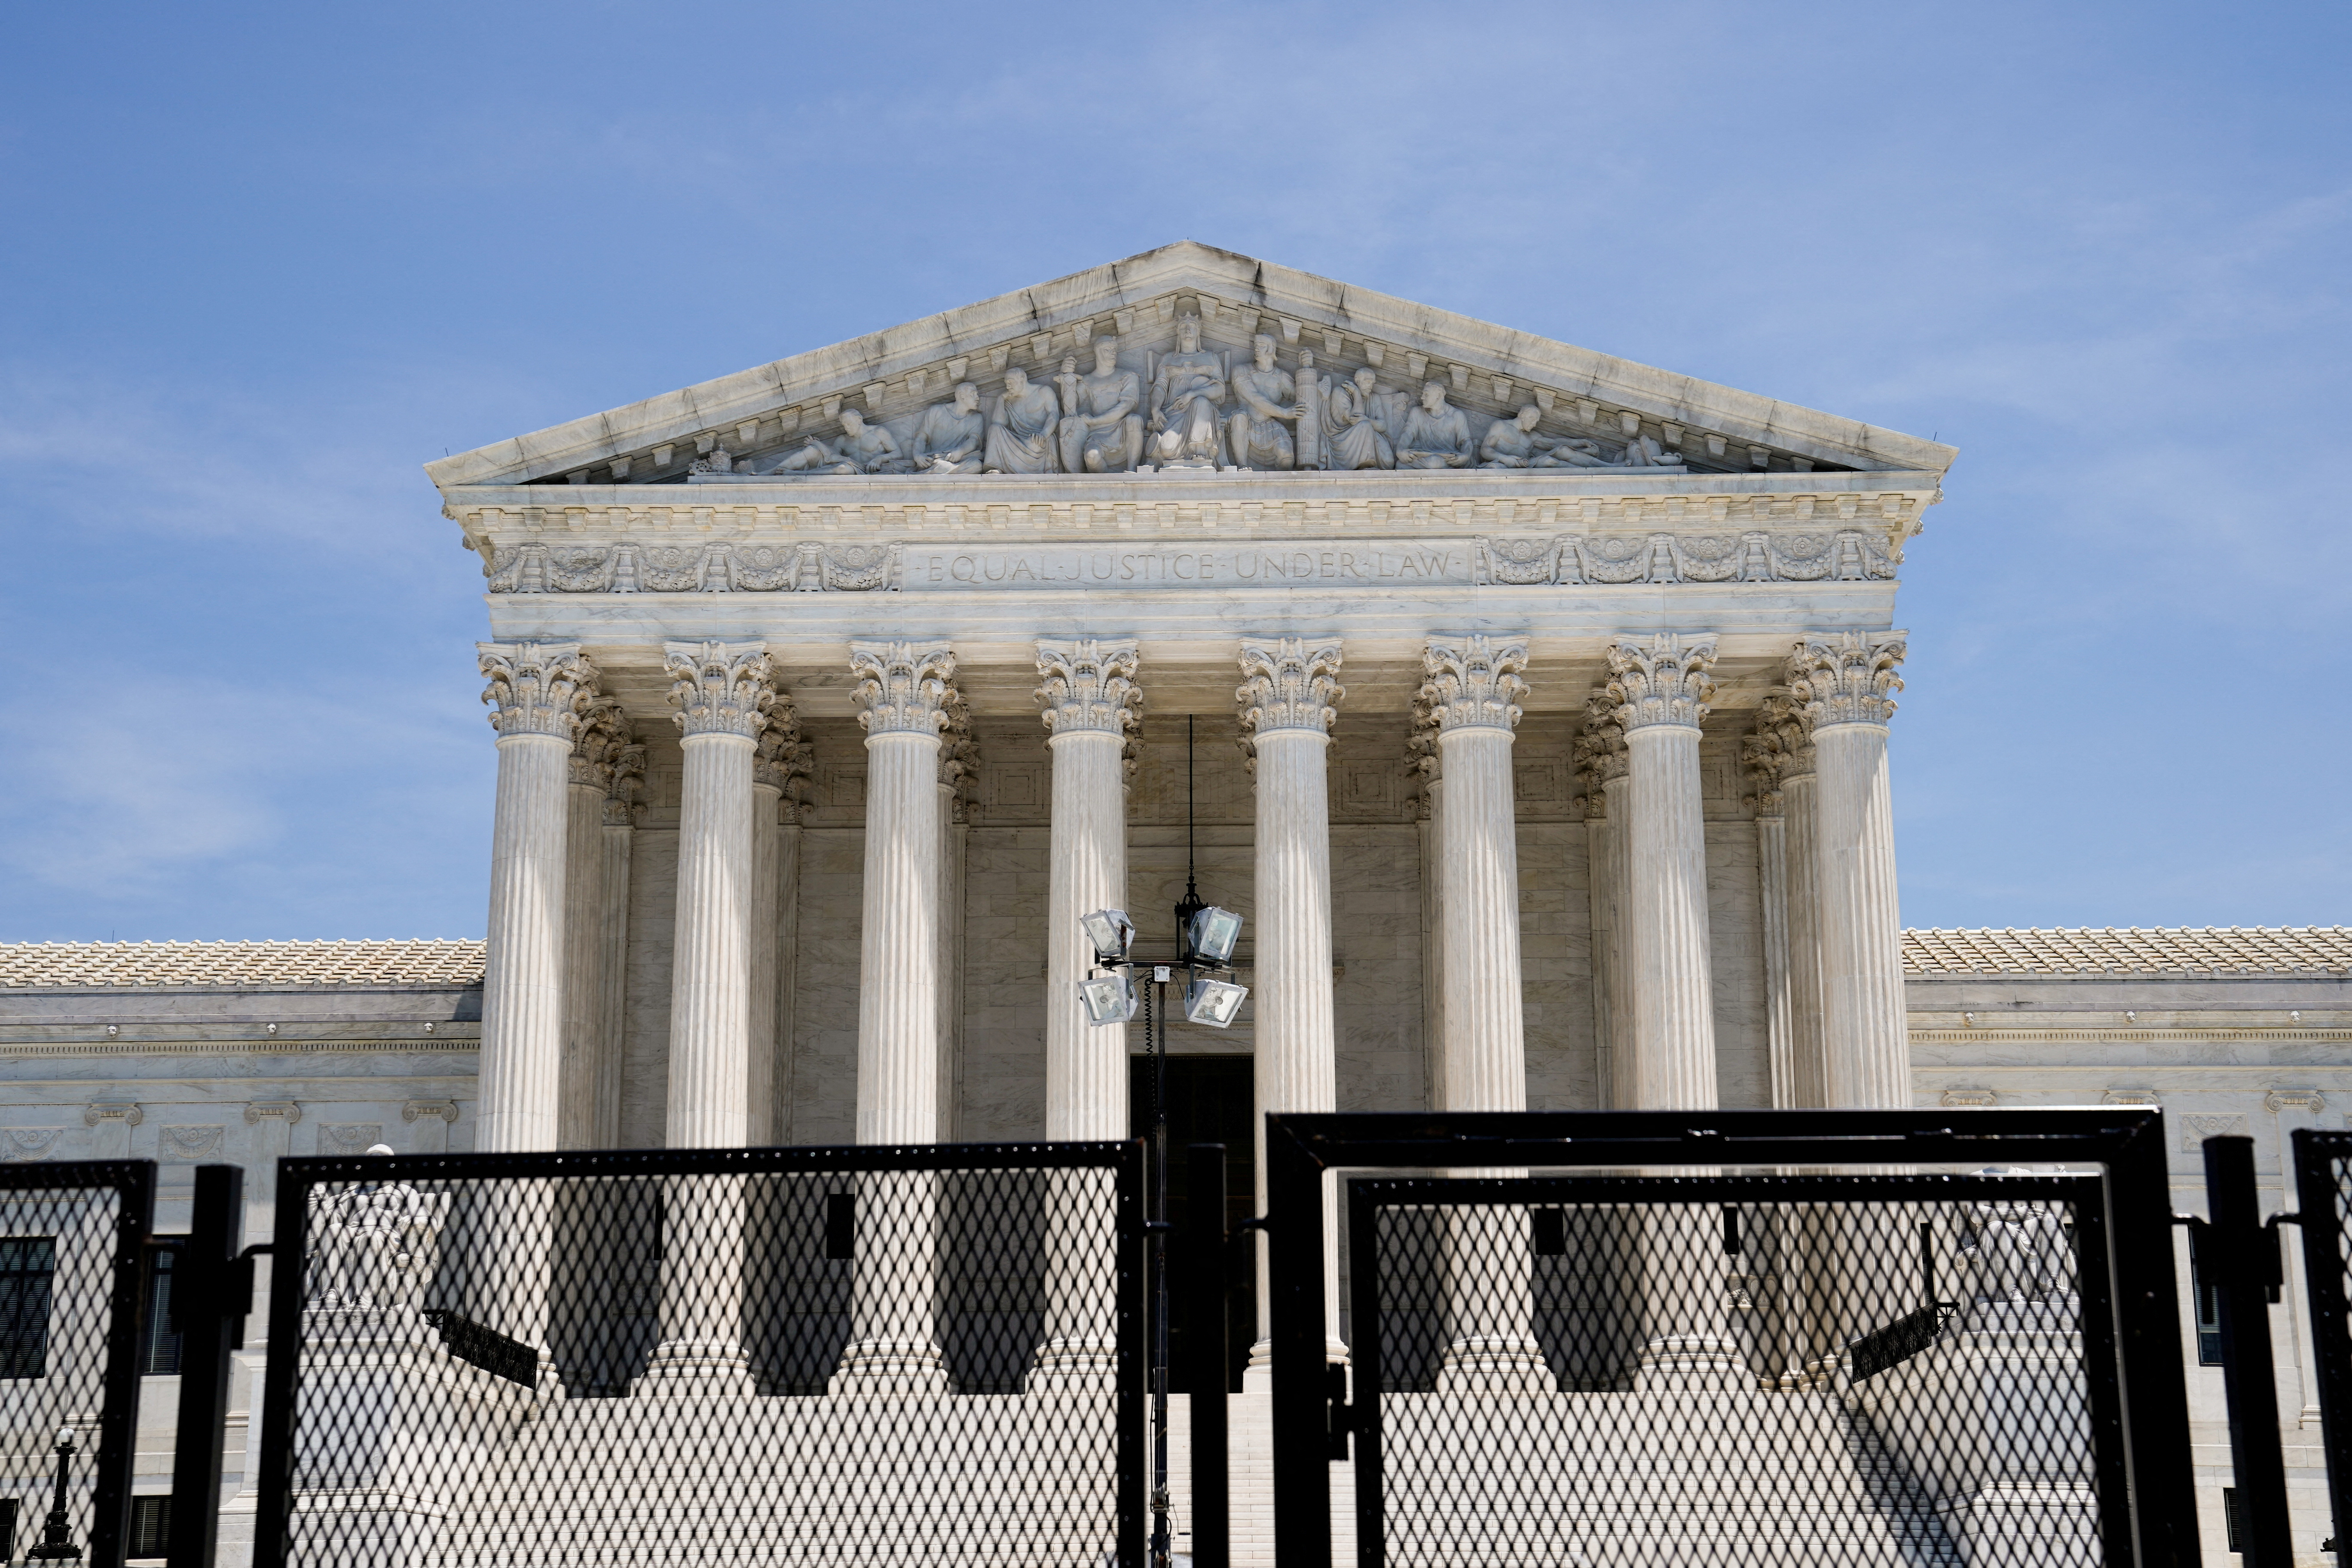 The U.S. Supreme Court building is seen in Washington